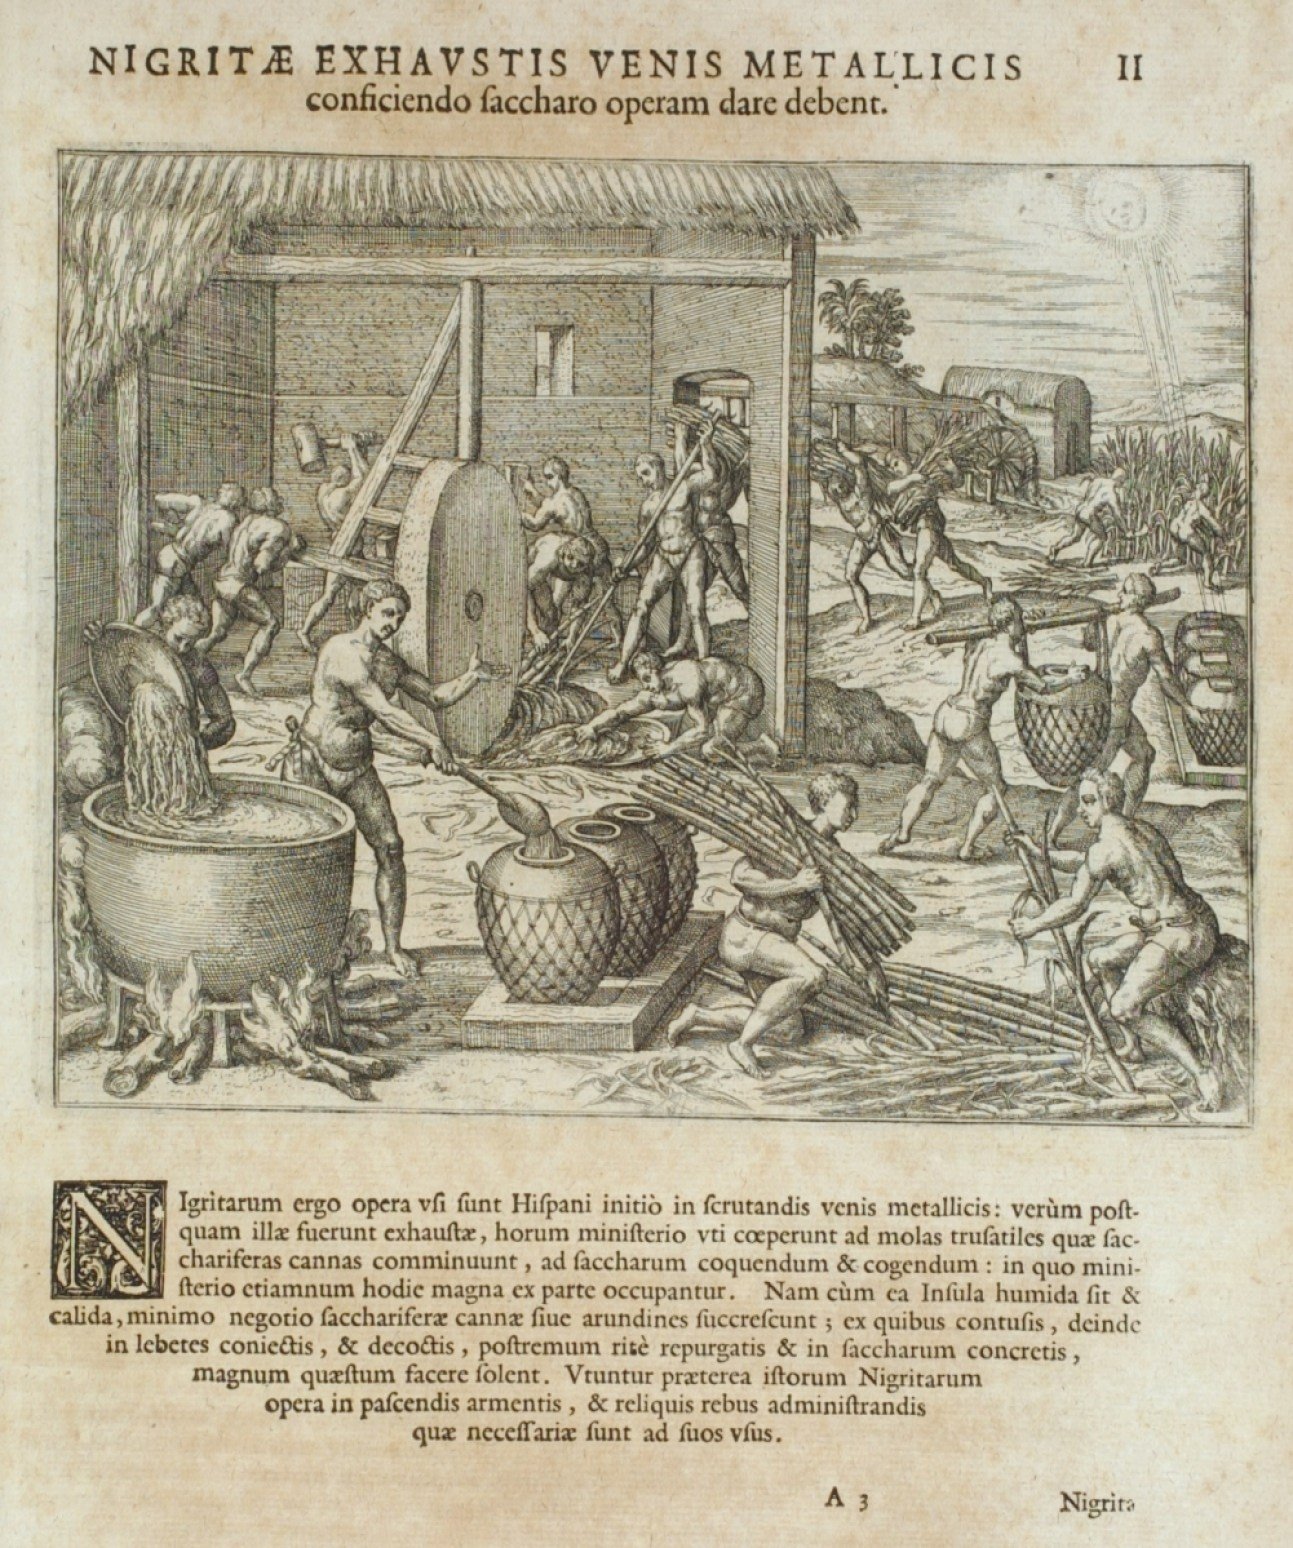 Slaves working to death in Saint Domingo Sugar Plantations in 1540-50s. 